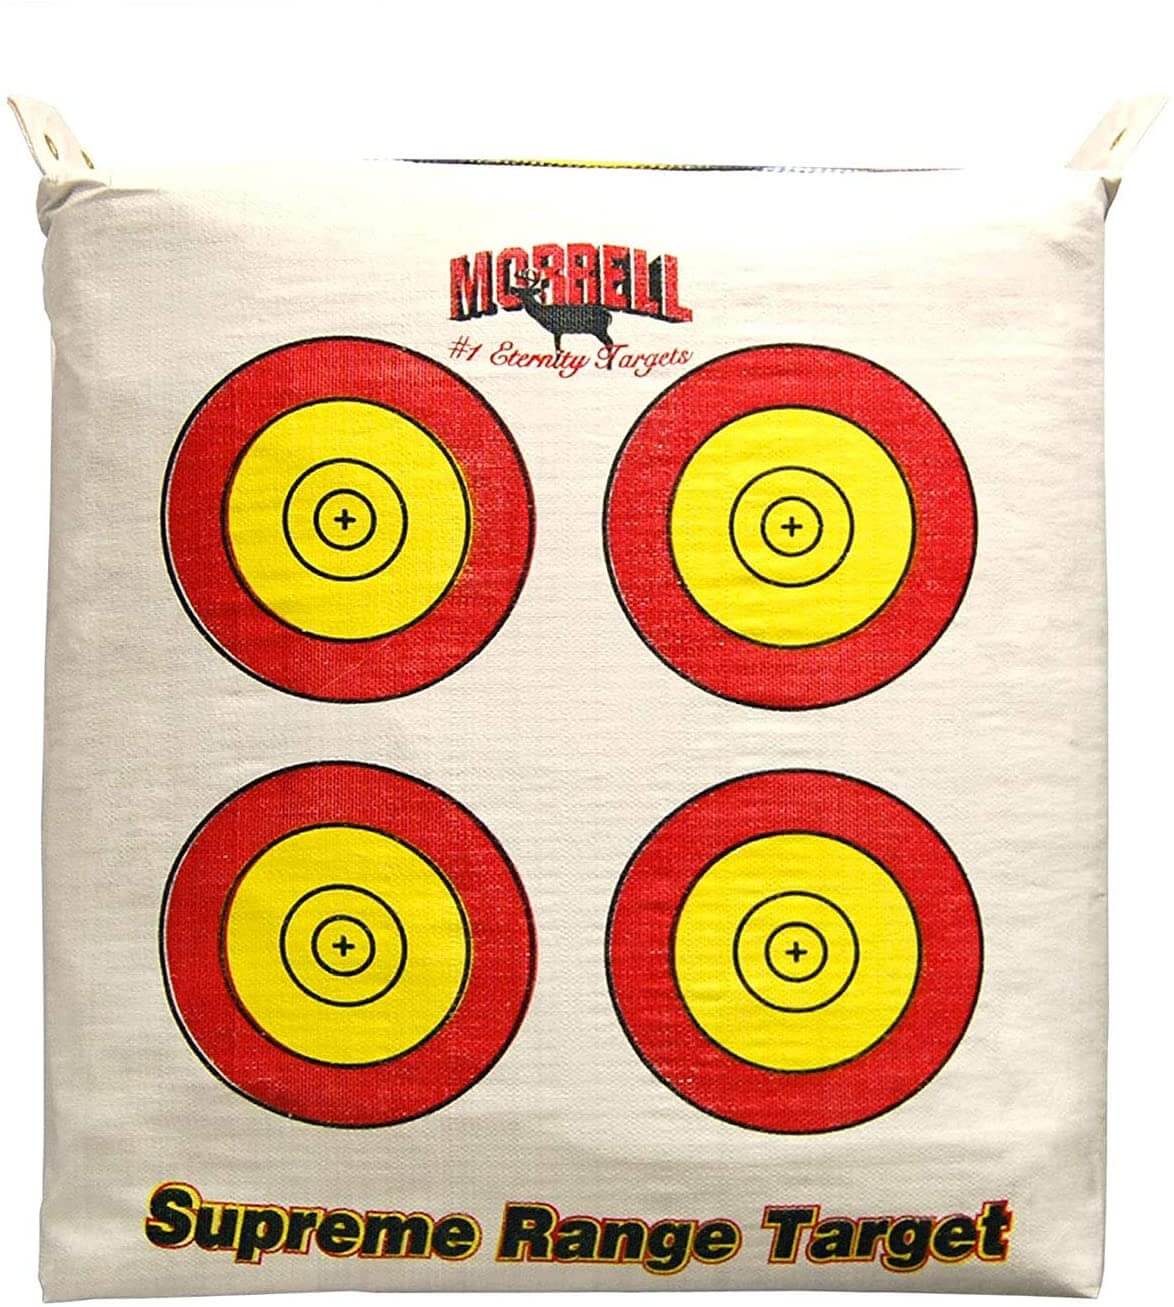 Weatherproof Supreme Range Archery Bag Target Replacement NASP Field Point Cover w/ 2 Shooting Sides and 4 Shooting Spots